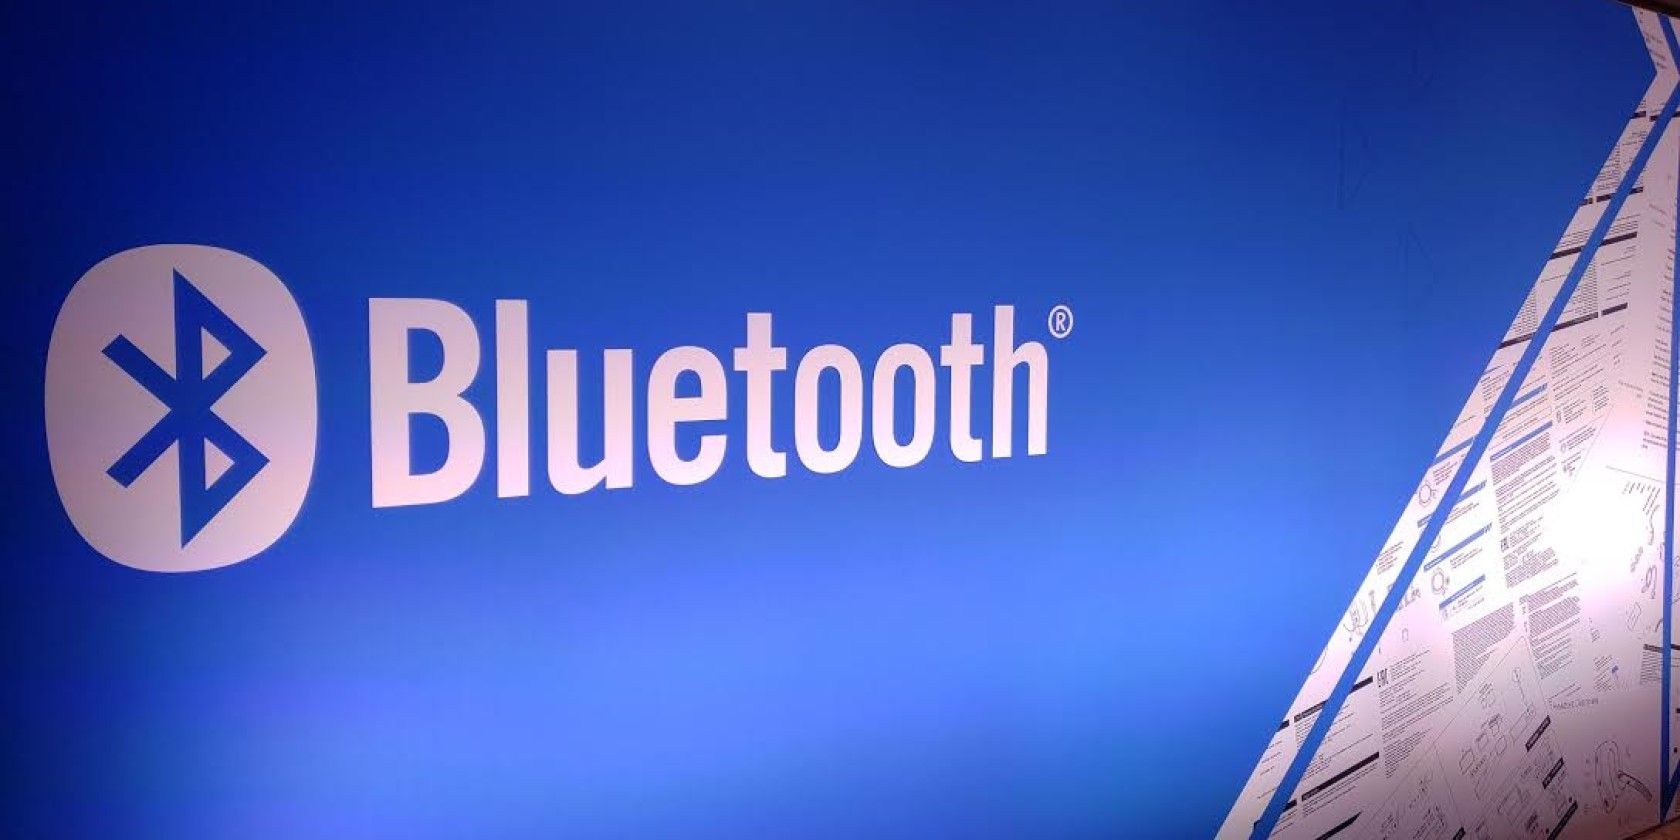 Introducing Bluetooth LE: A Generation of Audio-Sharing and High